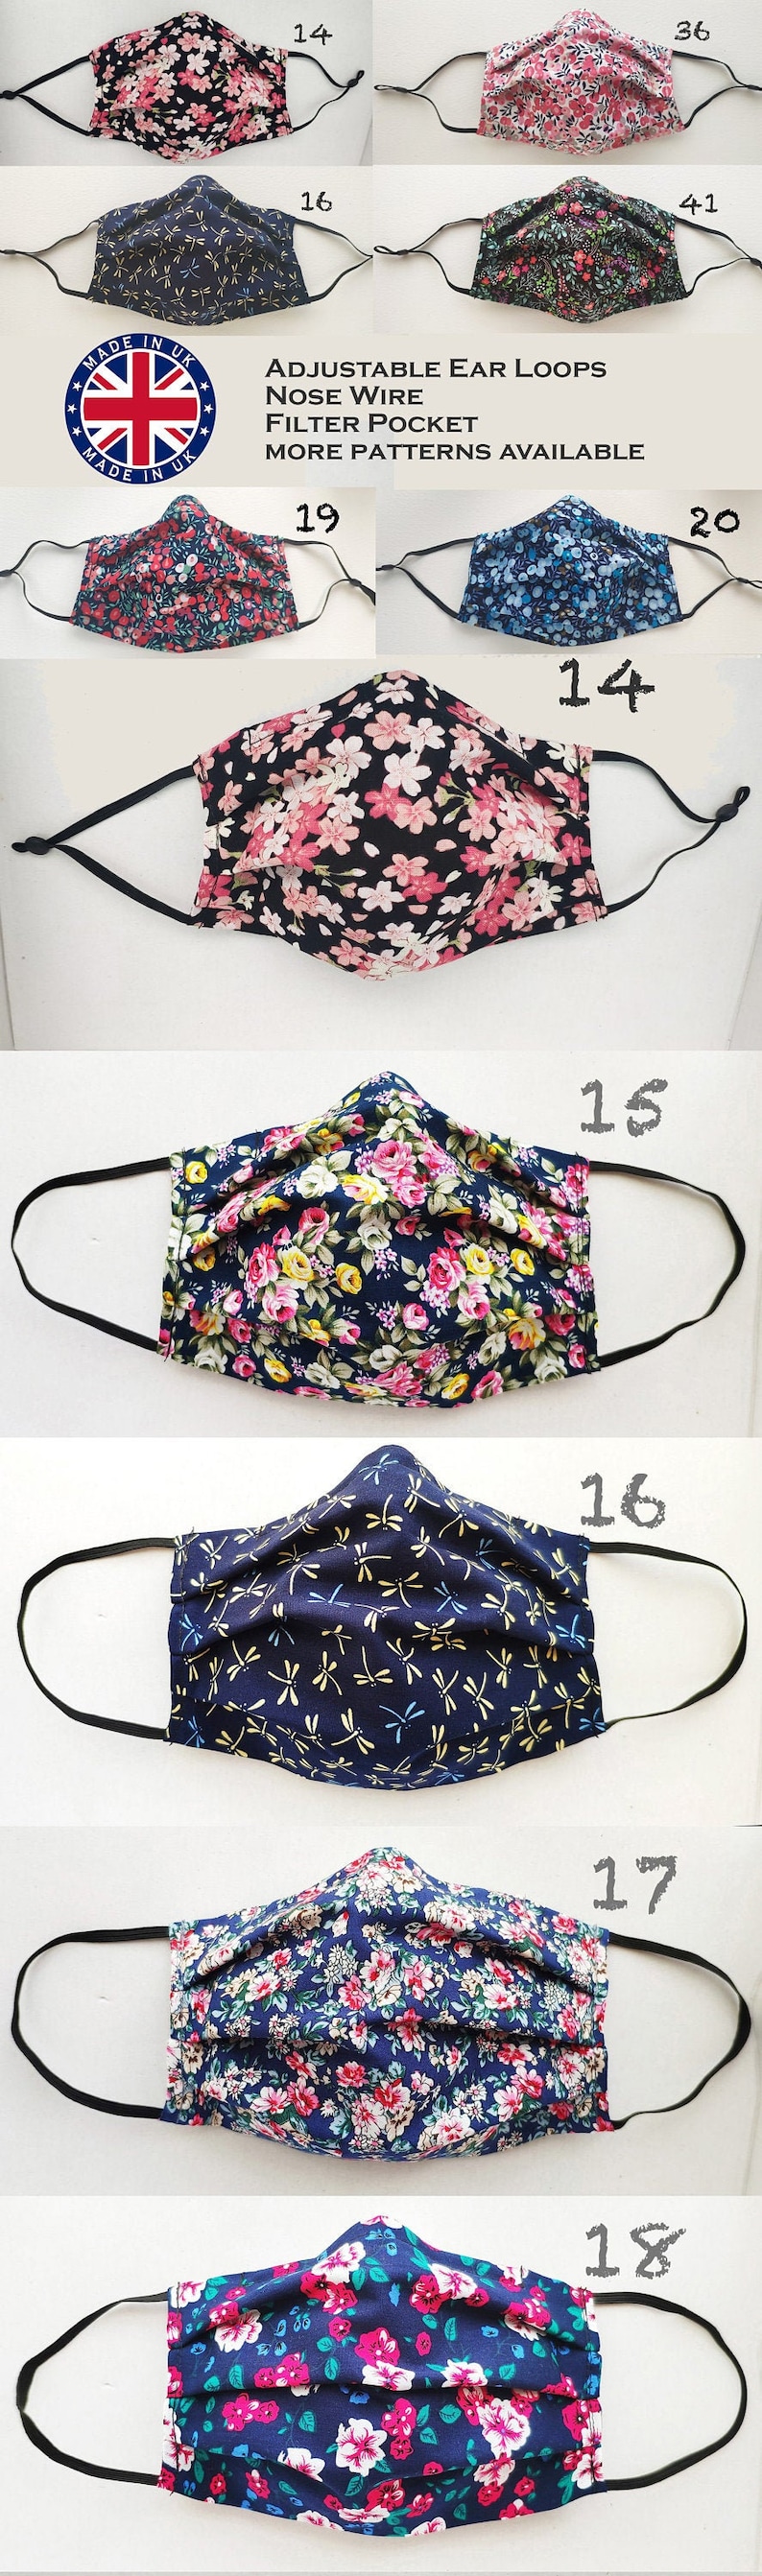 Handmade Washable Face Mask, with Adjustable Ear Loops, Nose Wire, Filter Pocket 100% Cotton KIDS AND ADULT Flowers/Patterns 